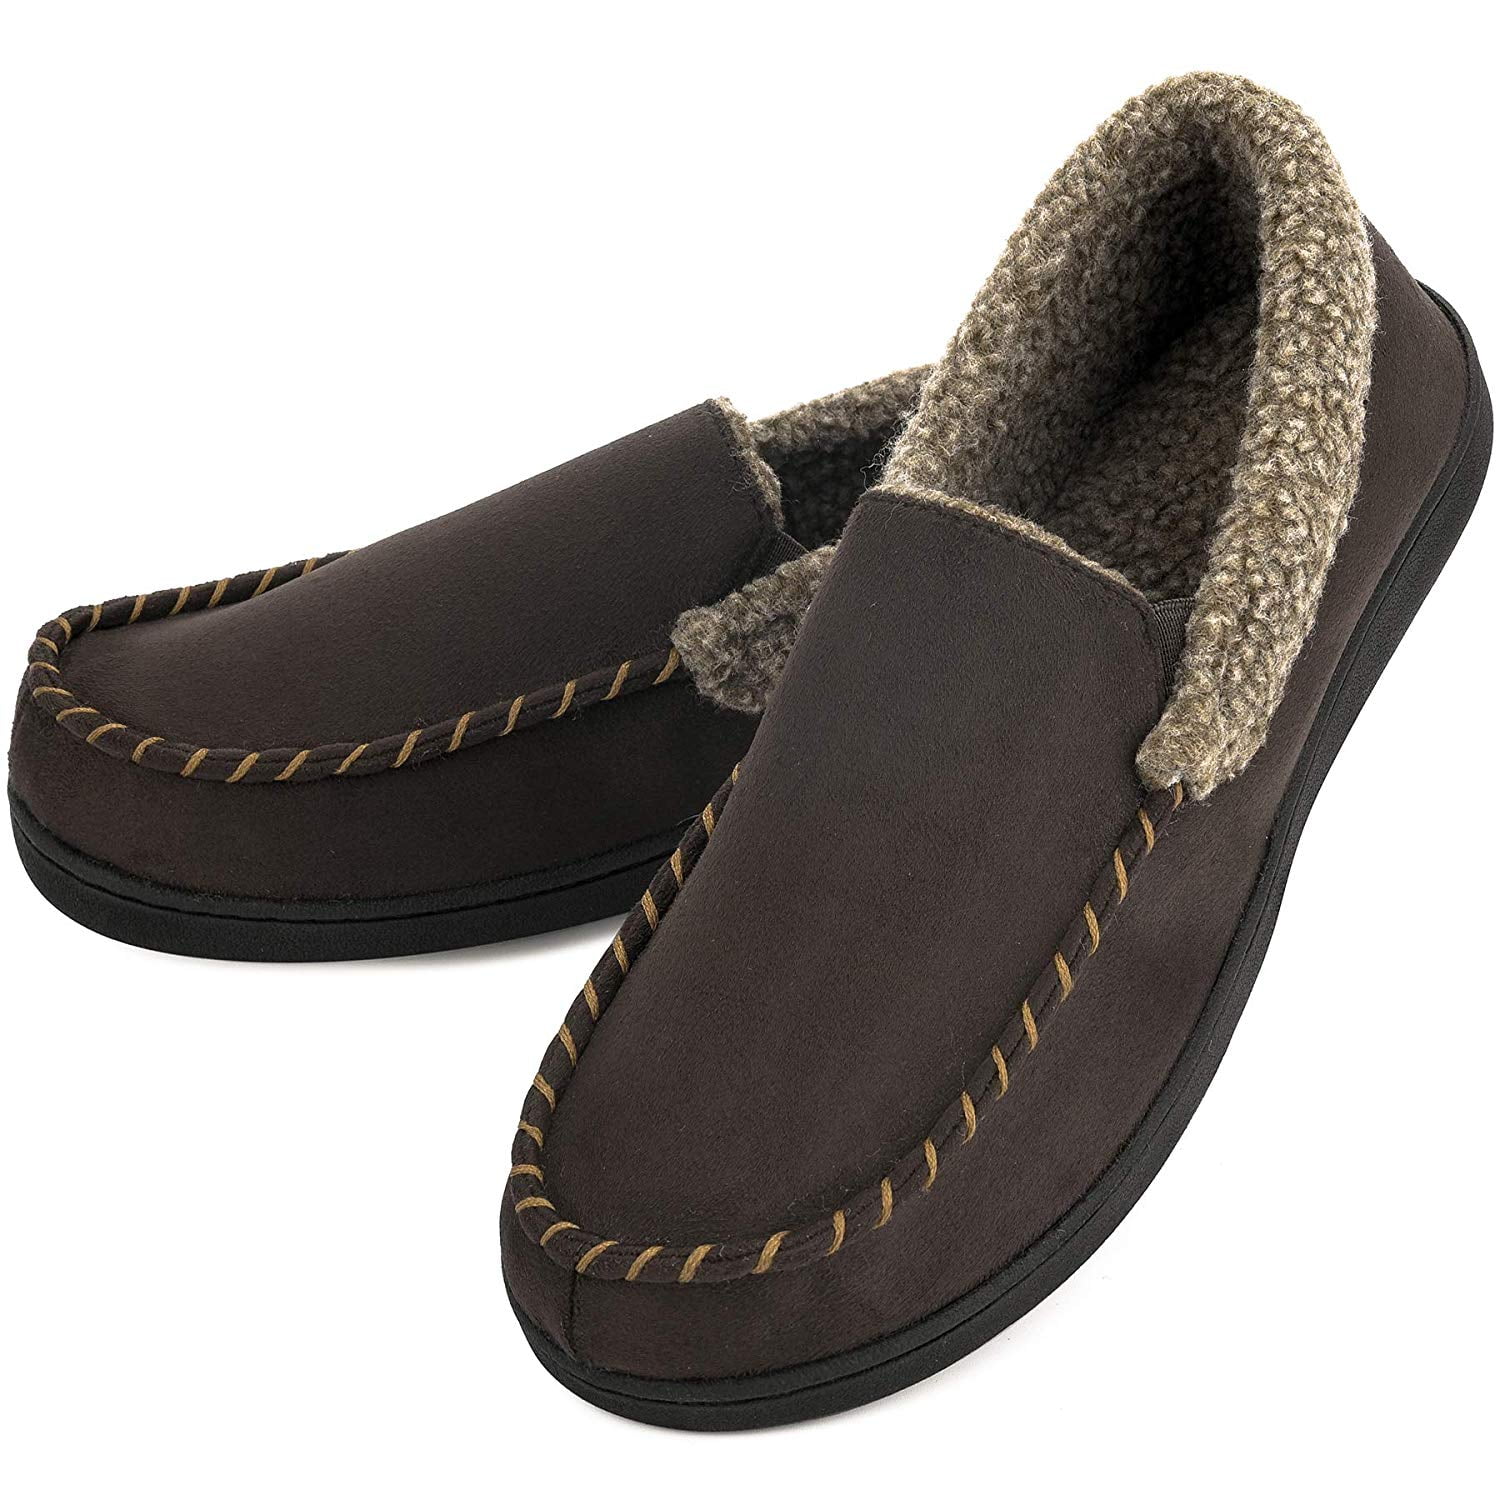 VONMAY - VONMAY Men's Moccasin Slippers Fuzzy House Shoes Fleece Home ...